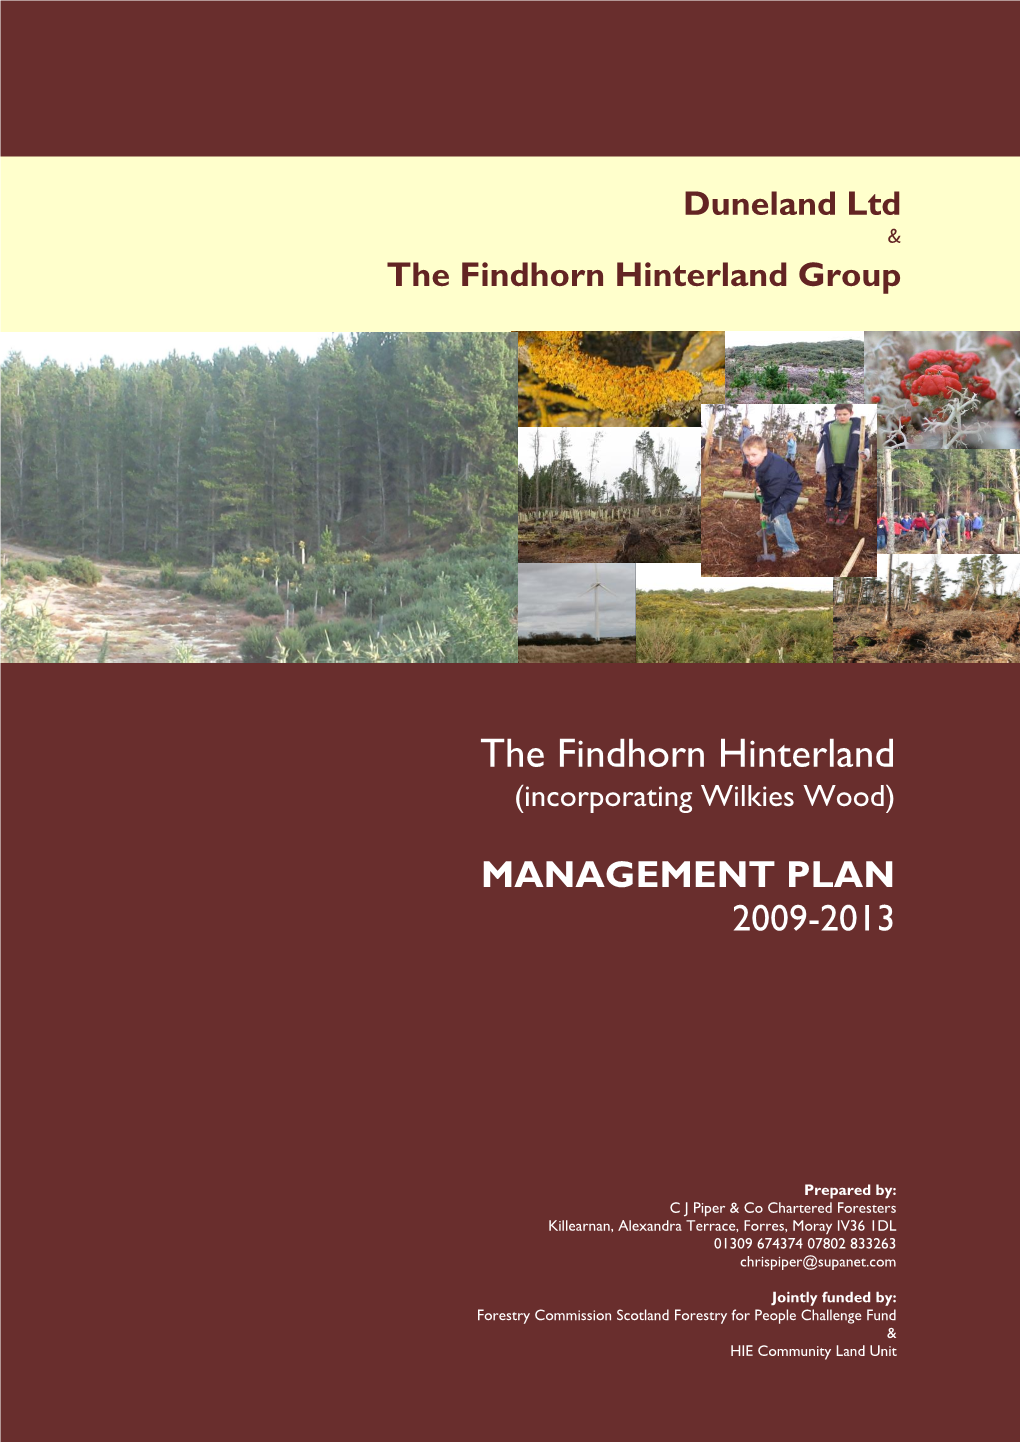 The Findhorn Hinterland Group